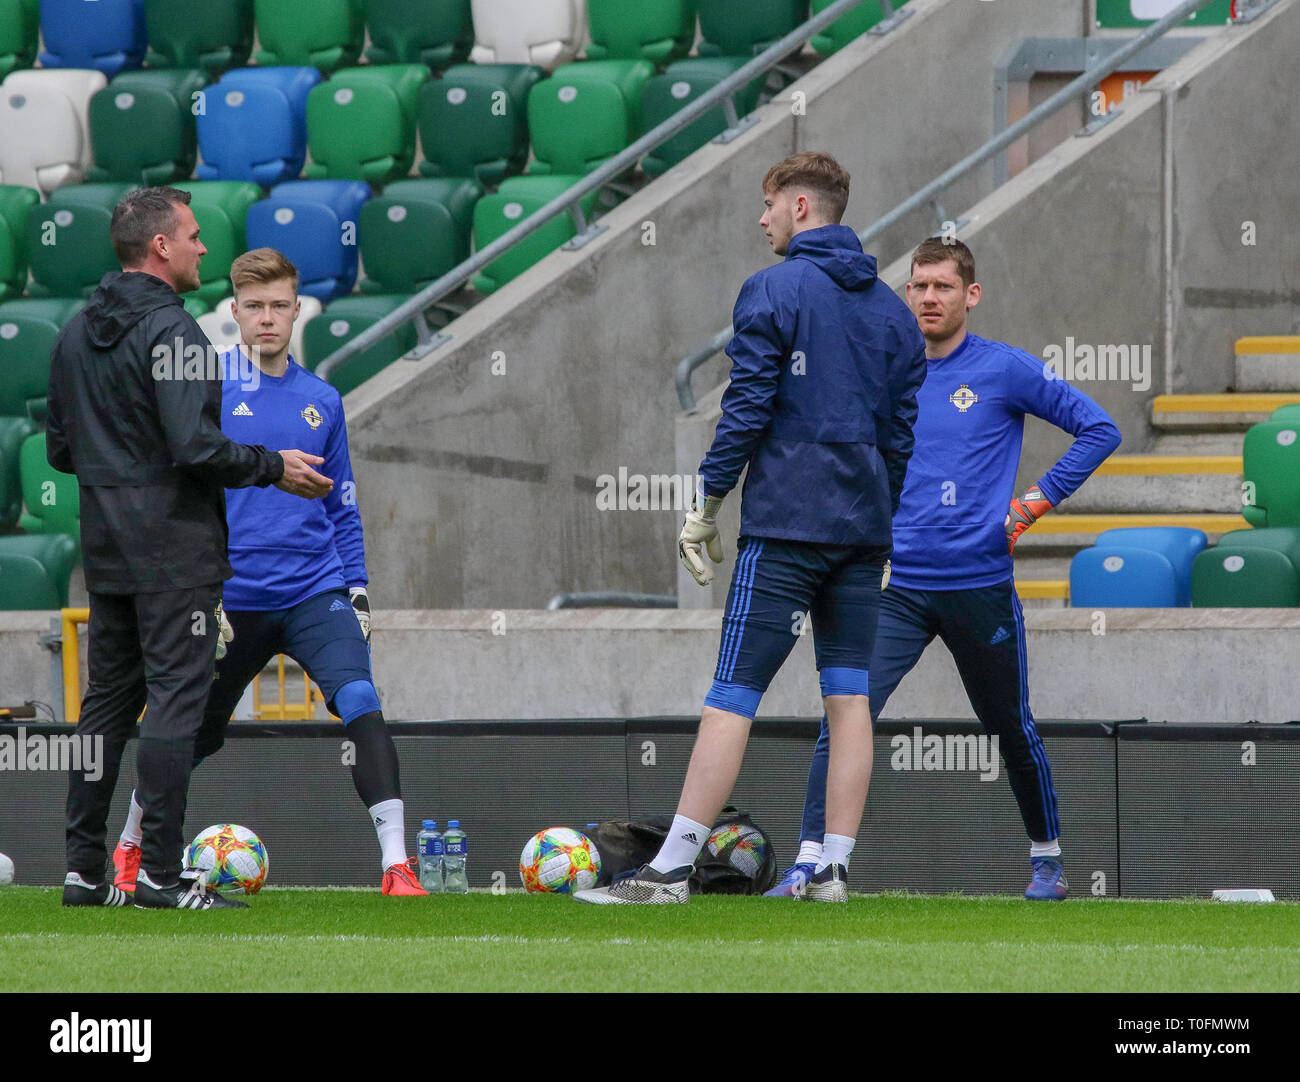 Windsor Park, Belfast, Northern Ireland.20 March 2019. Northern Ireland training in Belfast this morning ahead of their UEFA EURO 2020 Qualifier against Estonia tomorrow night in the stadium. Goalkeeping coach Steve Harper (left) with Bailey Peacock-Farrell, Conor Hazard  and Michael McGovern. Credit: David Hunter/Alamy Live News. Stock Photo